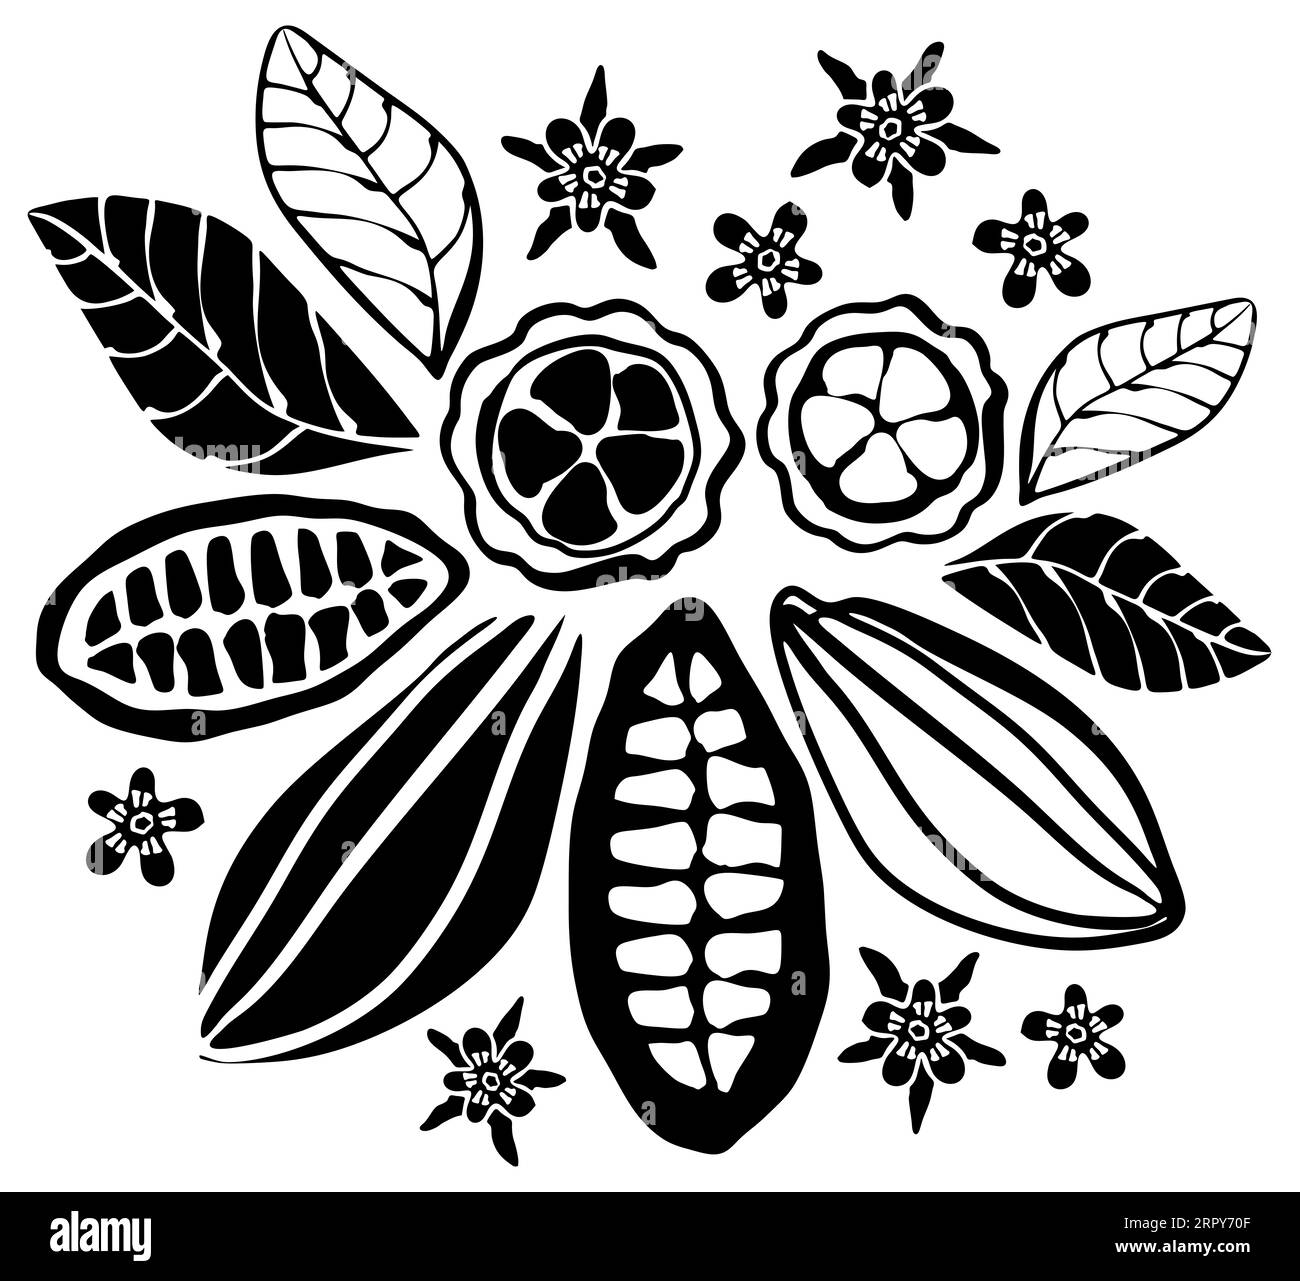 Set of cocoa fruits, leaves and flowers in black and white Stock Photo